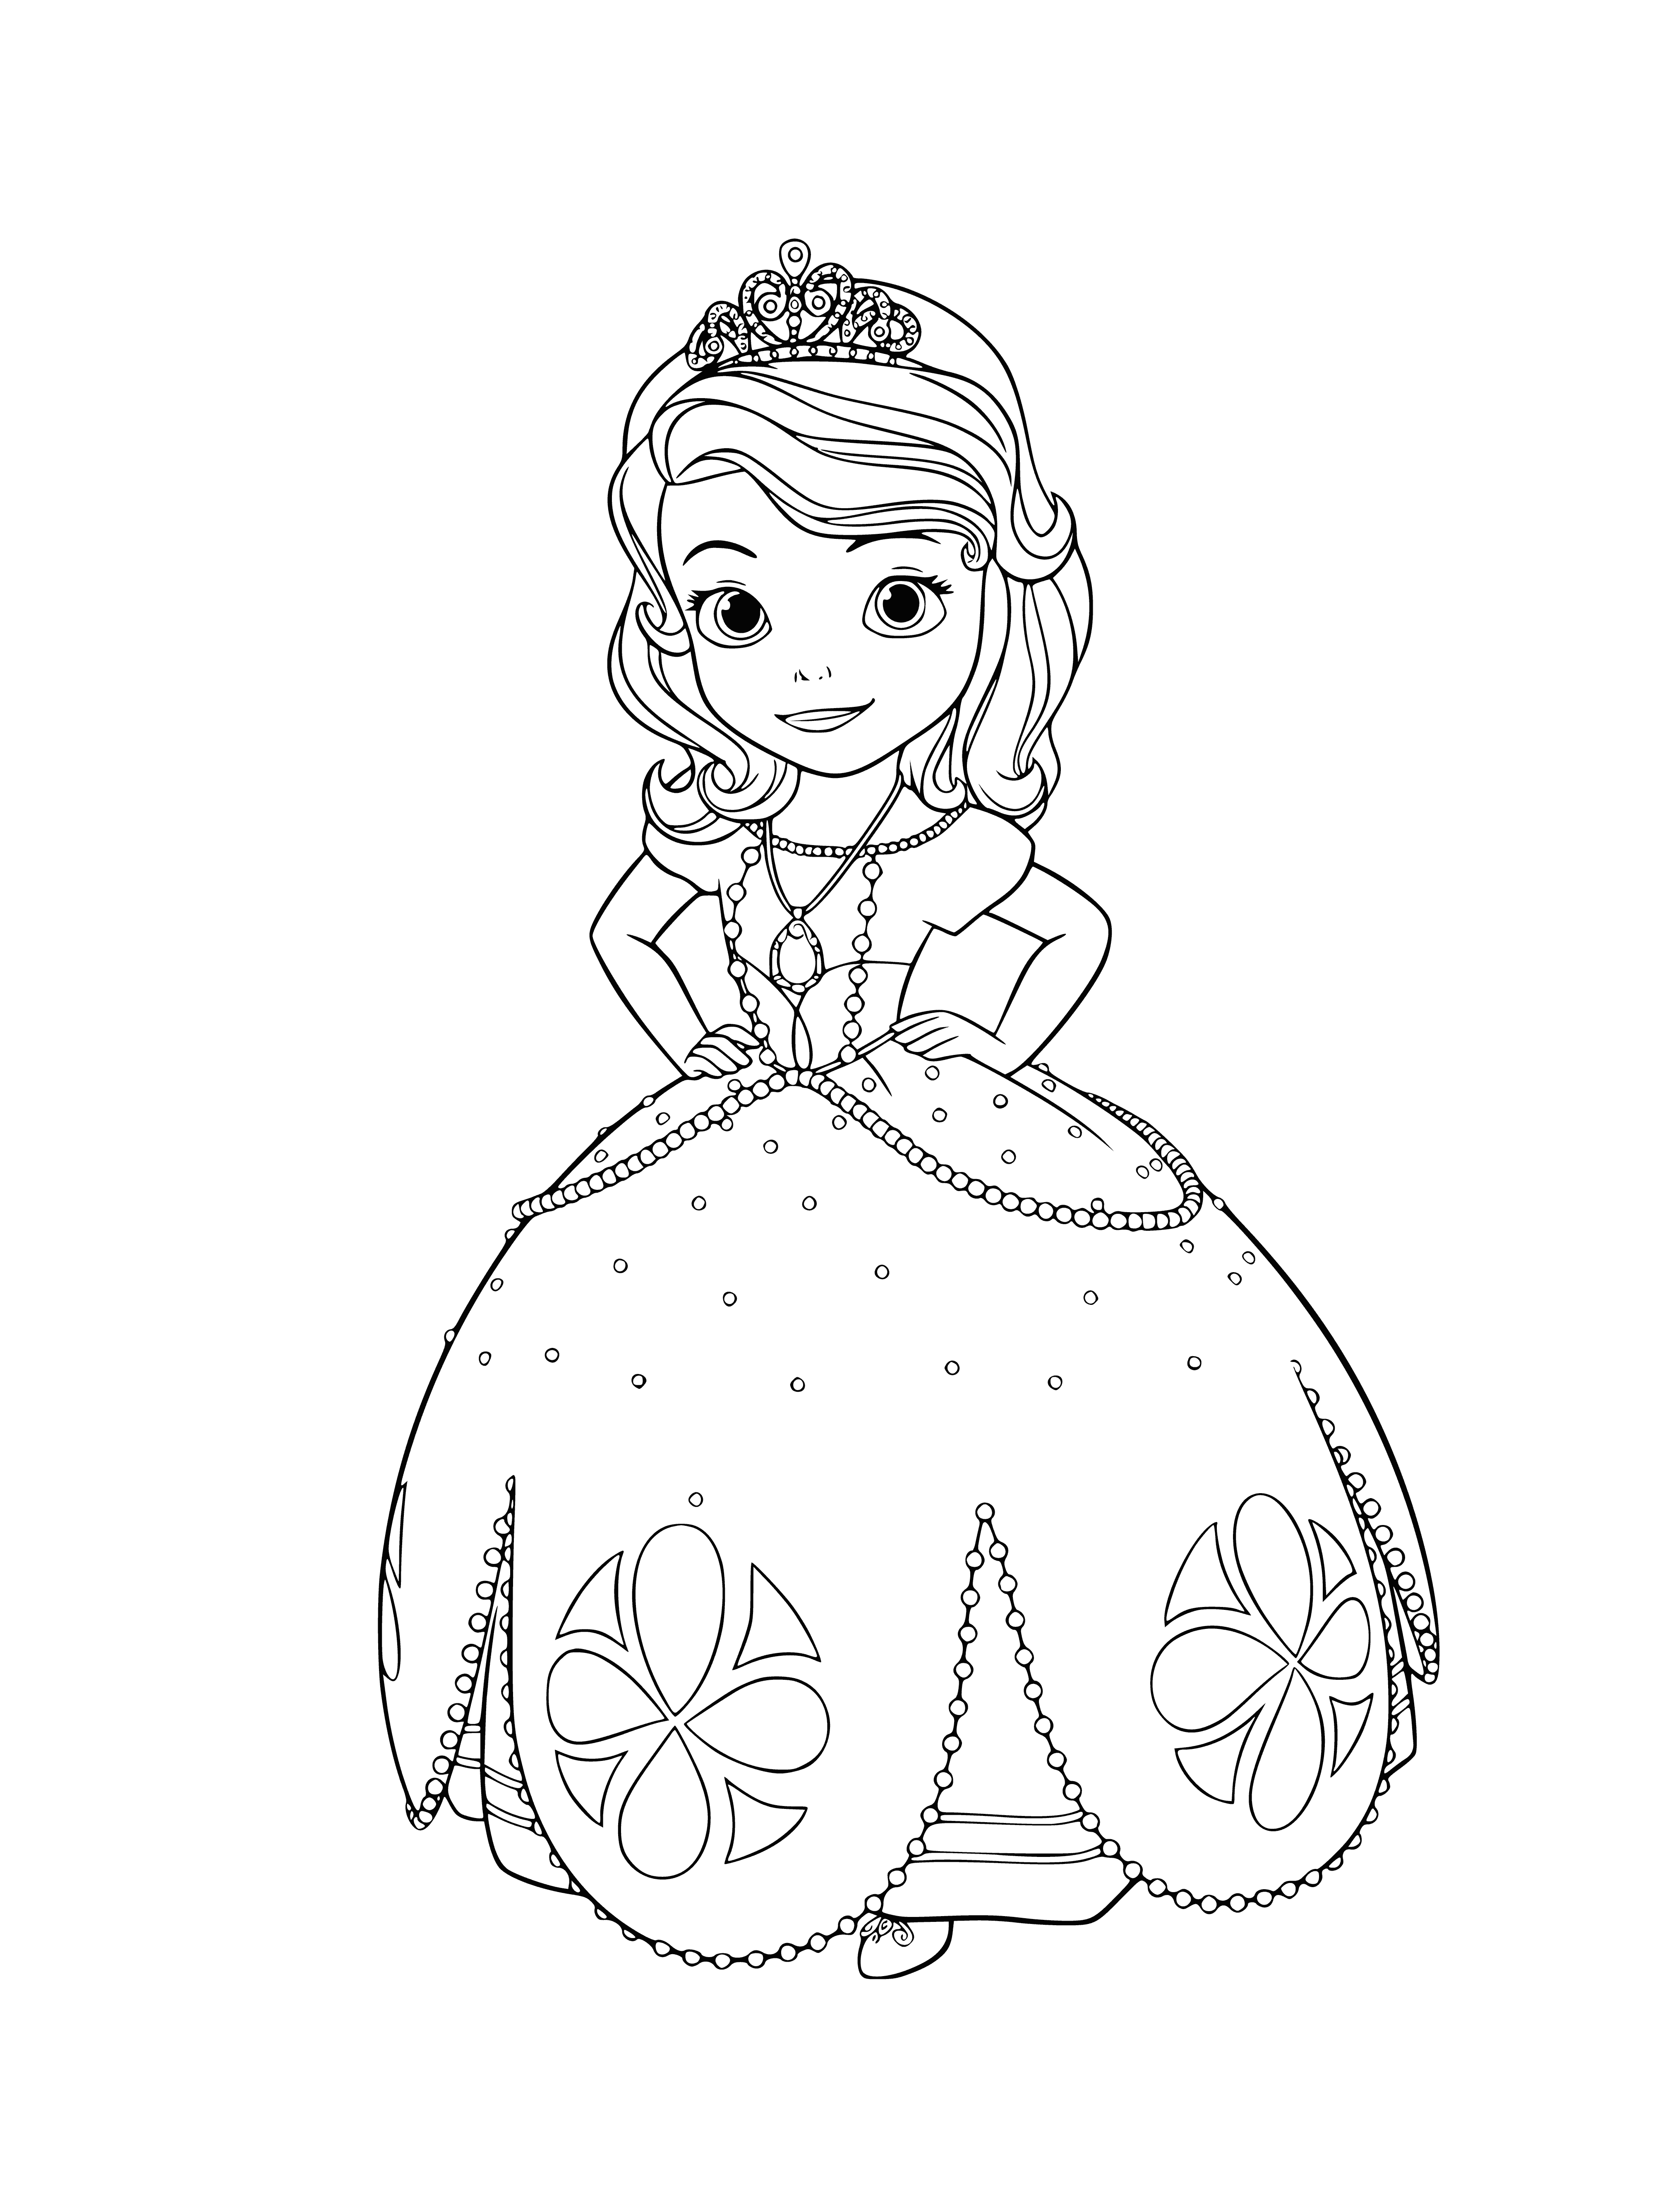 coloring page: Little Sofia has light skin, dark hair and a pink dress with a gold tiara. She's cuddling a white rabbit.